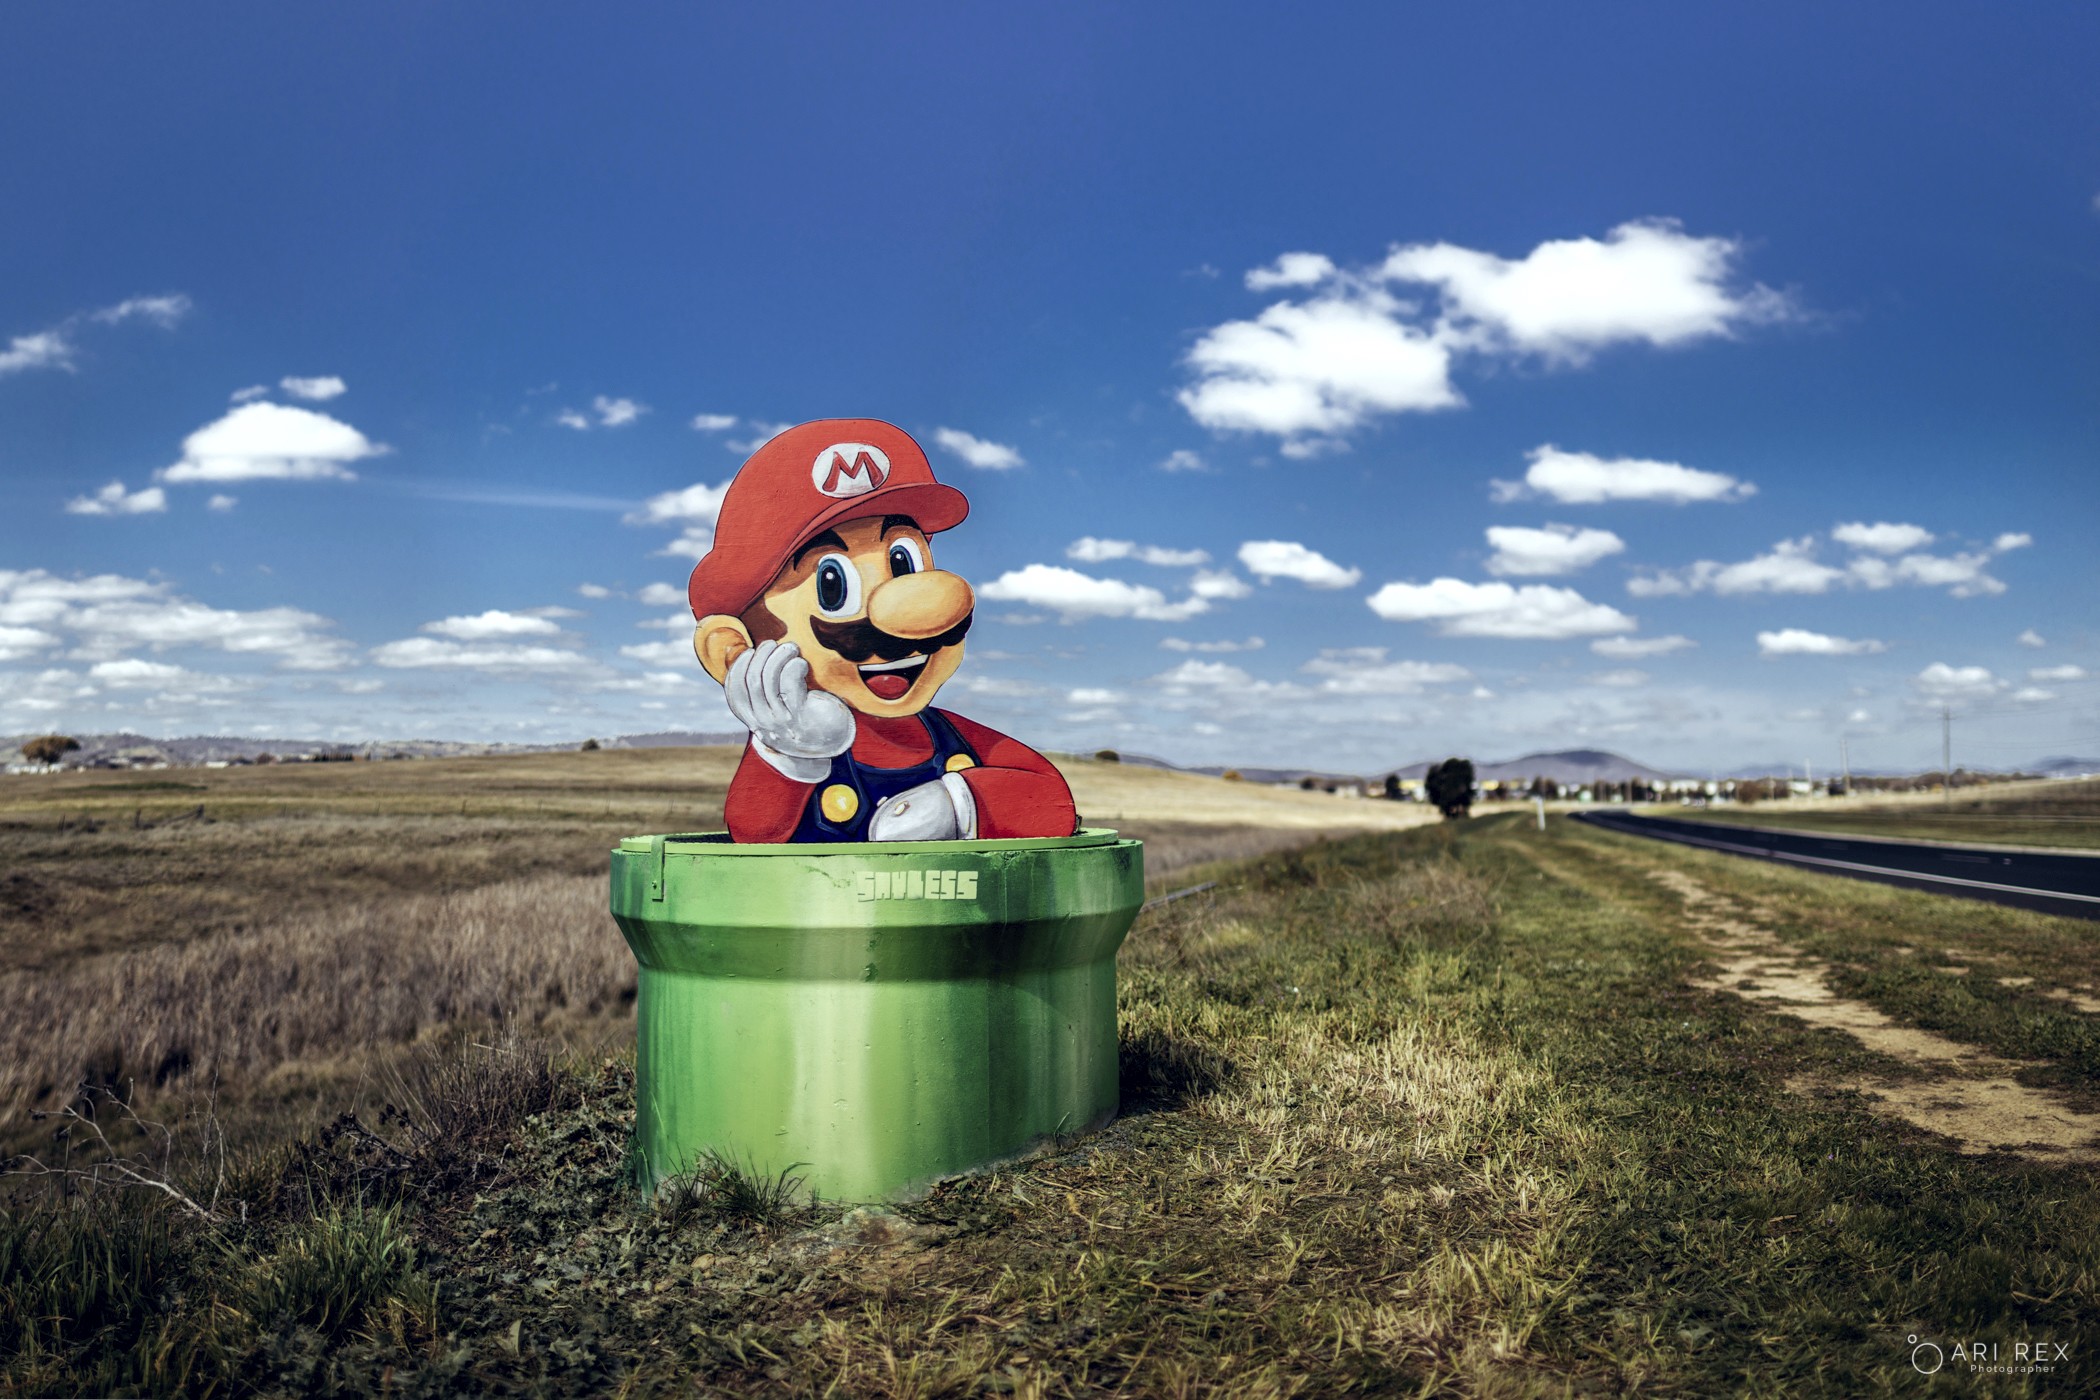 Who took Mario? Quest begins to find the life-sized cutout taken from Gungahlin